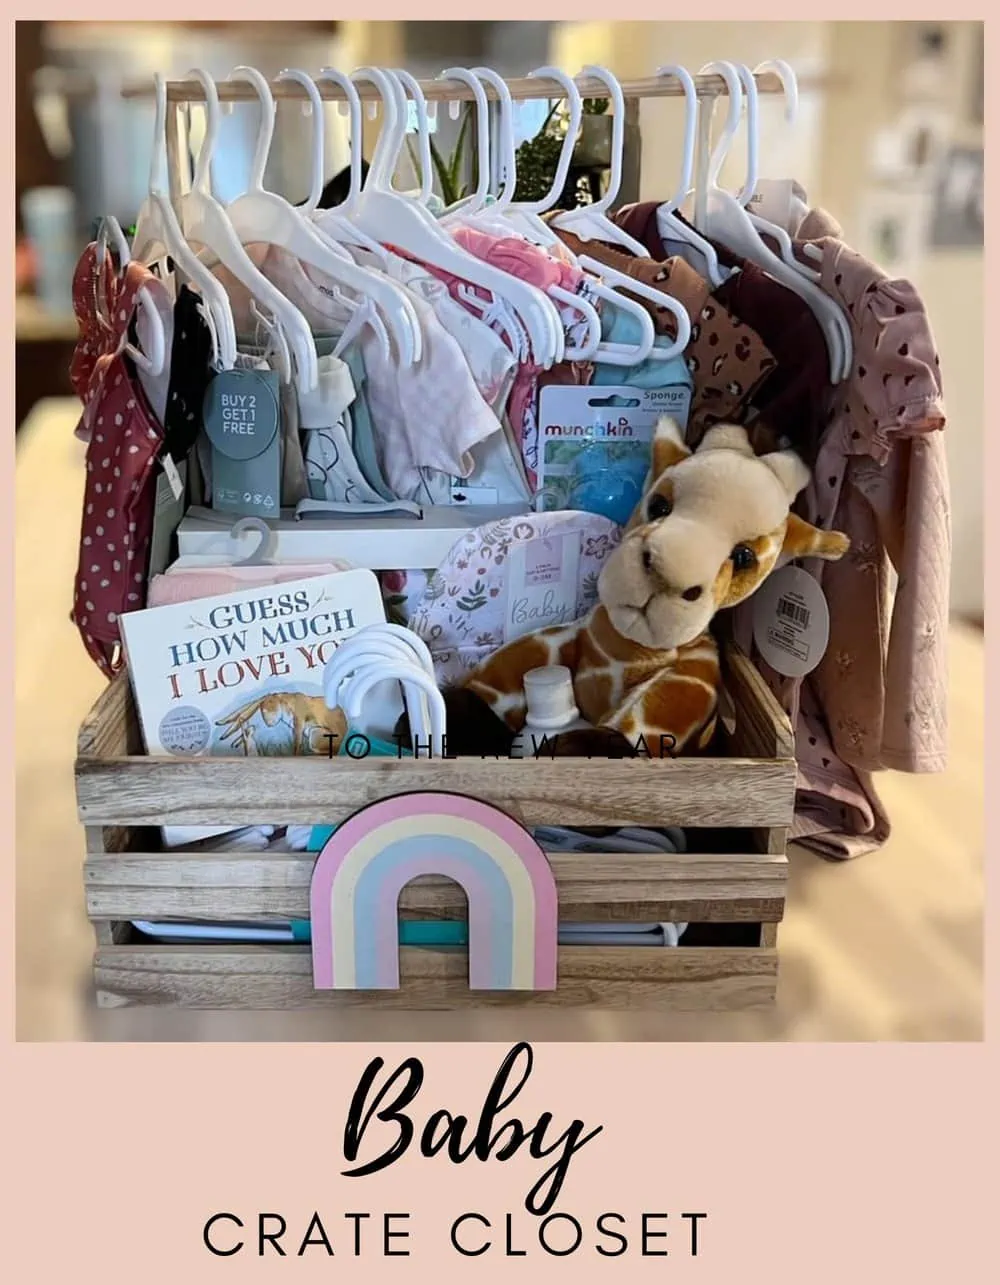 Pin by By Shelly Puig on Pins creados por ti | Baby shower baskets, Diy baby  shower gifts, Baby shower girl gifts basket